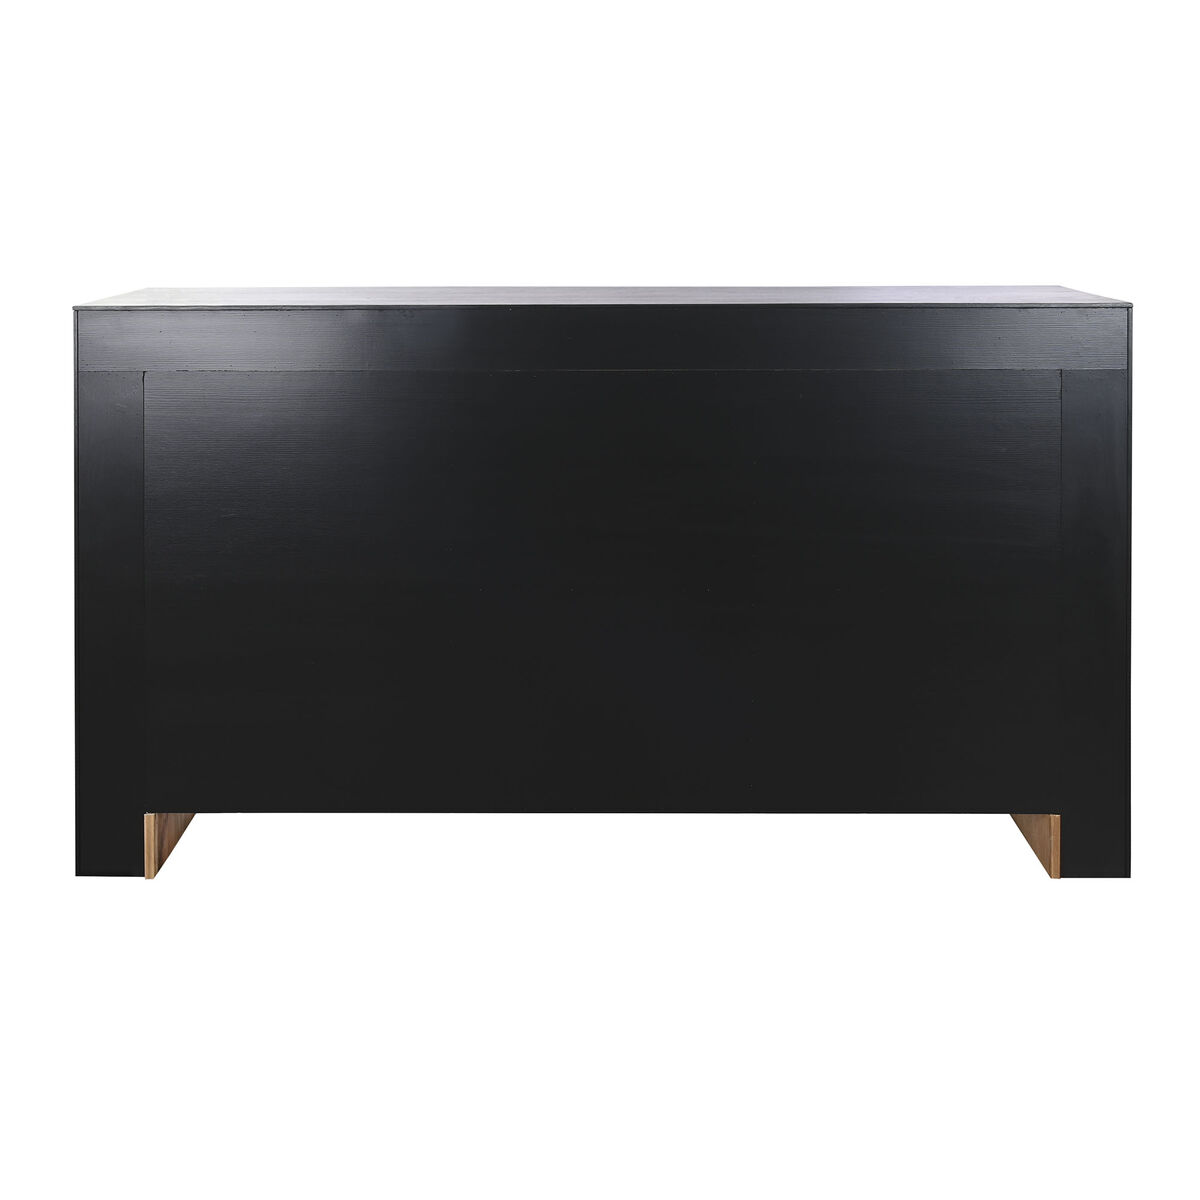 Sideboard DKD Home Decor Brown Black Pinewood Recycled Wood 182 x 50 x 107